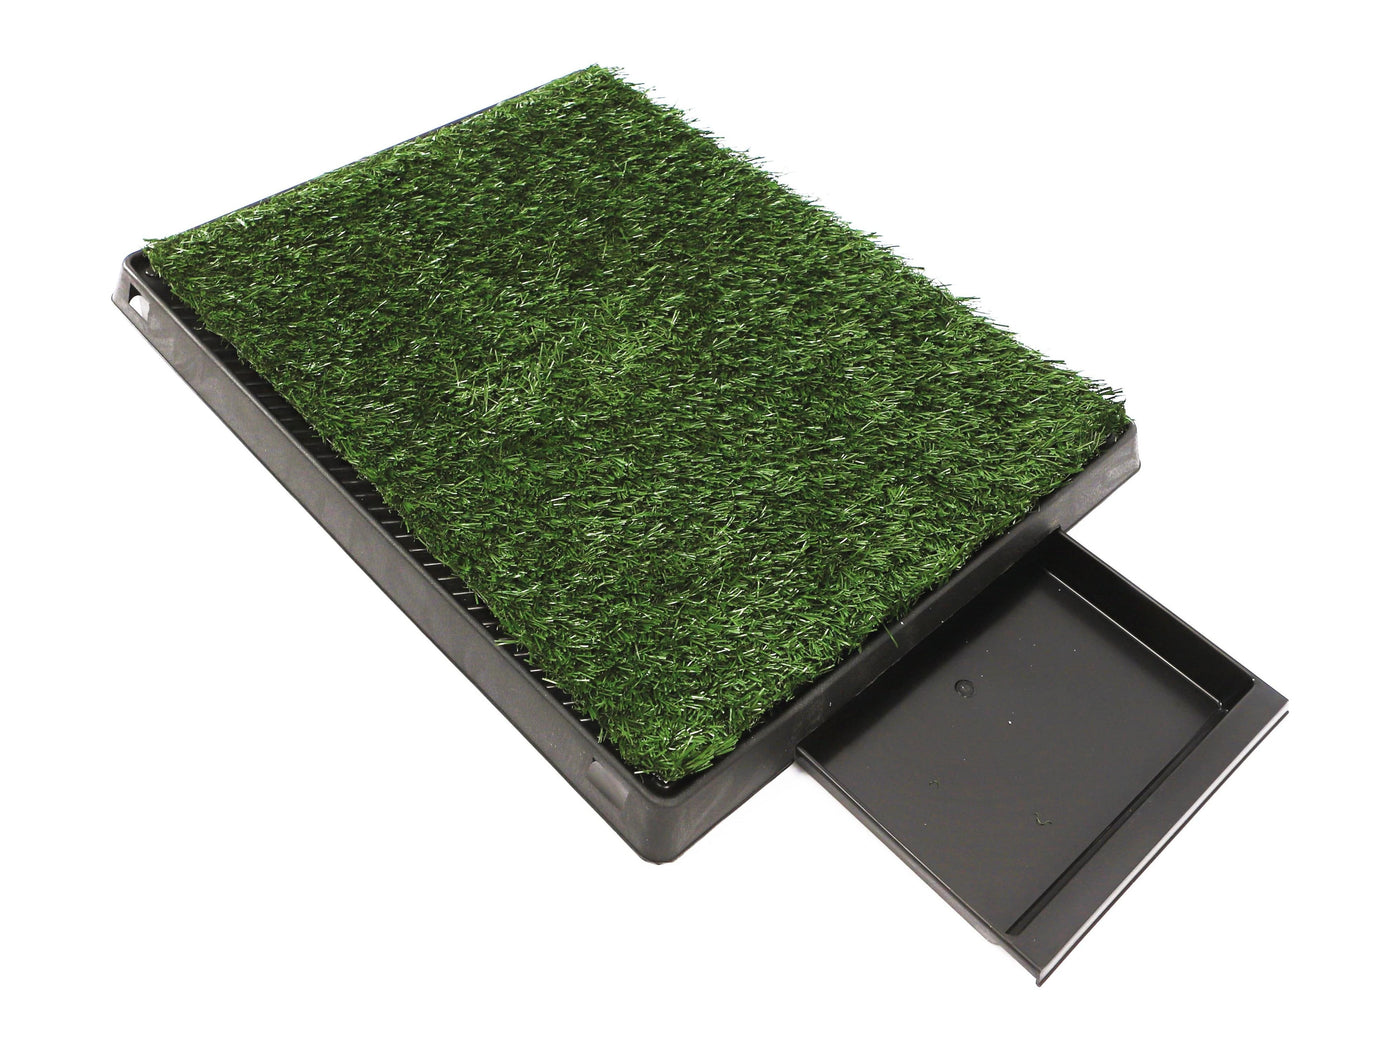 Pad Dog Grass with tray